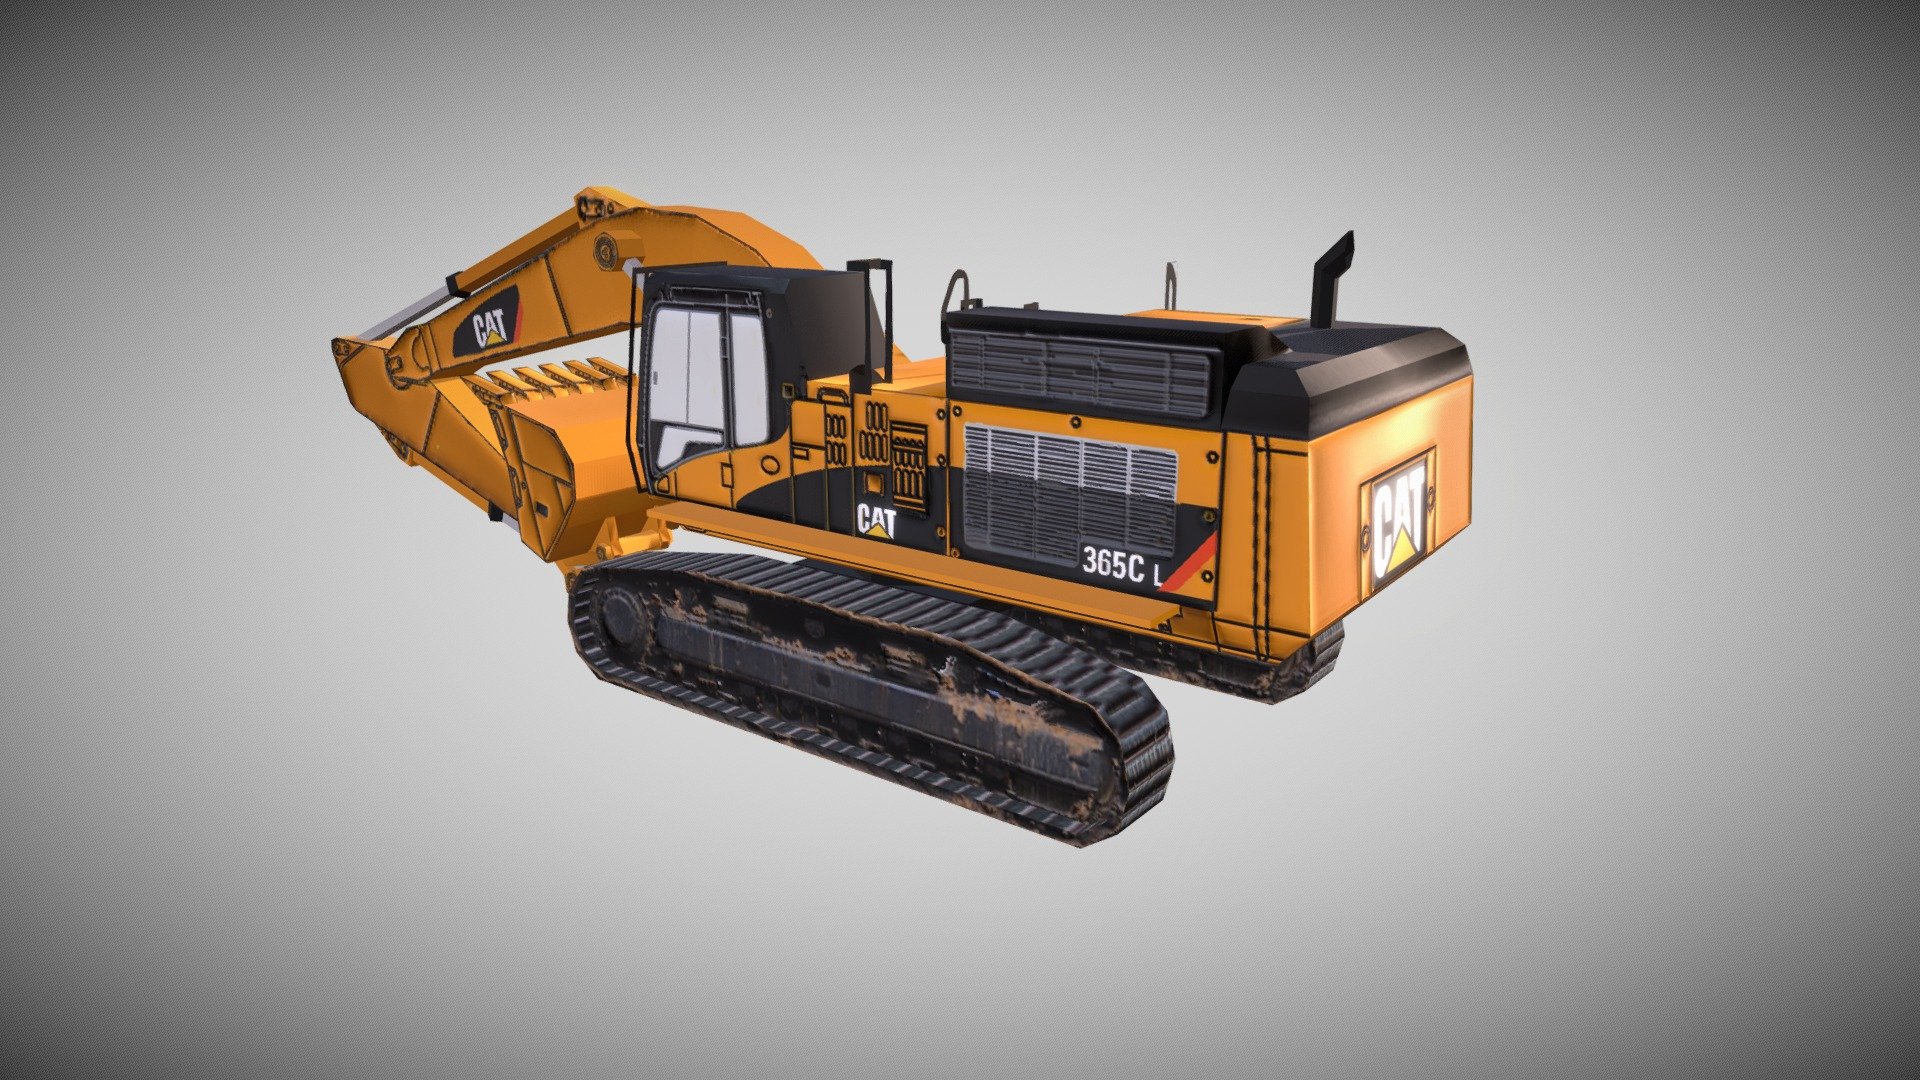 This is a low poly model of a Caterpillar 365C L Hydraulic Excavator. I kept the model as close to the original as it was possible for me.
Please feel free to leave constructive criticism in the comments.

Specs of the real thing:


Engine:
• Net Flywheel Power 302 kW 404 hp


Drive:
• Maximum Travel Speed 4.1 km/h 2.6 mph

• Maximum Drawbar Pull – 462 kN 103,767 lb
Long Undercarriage


Weights:
• Operating Weight – 65 960 kg 145,430 lb
Long Undercarriage

• Reach Boom, R3.6 (11&lsquo;10